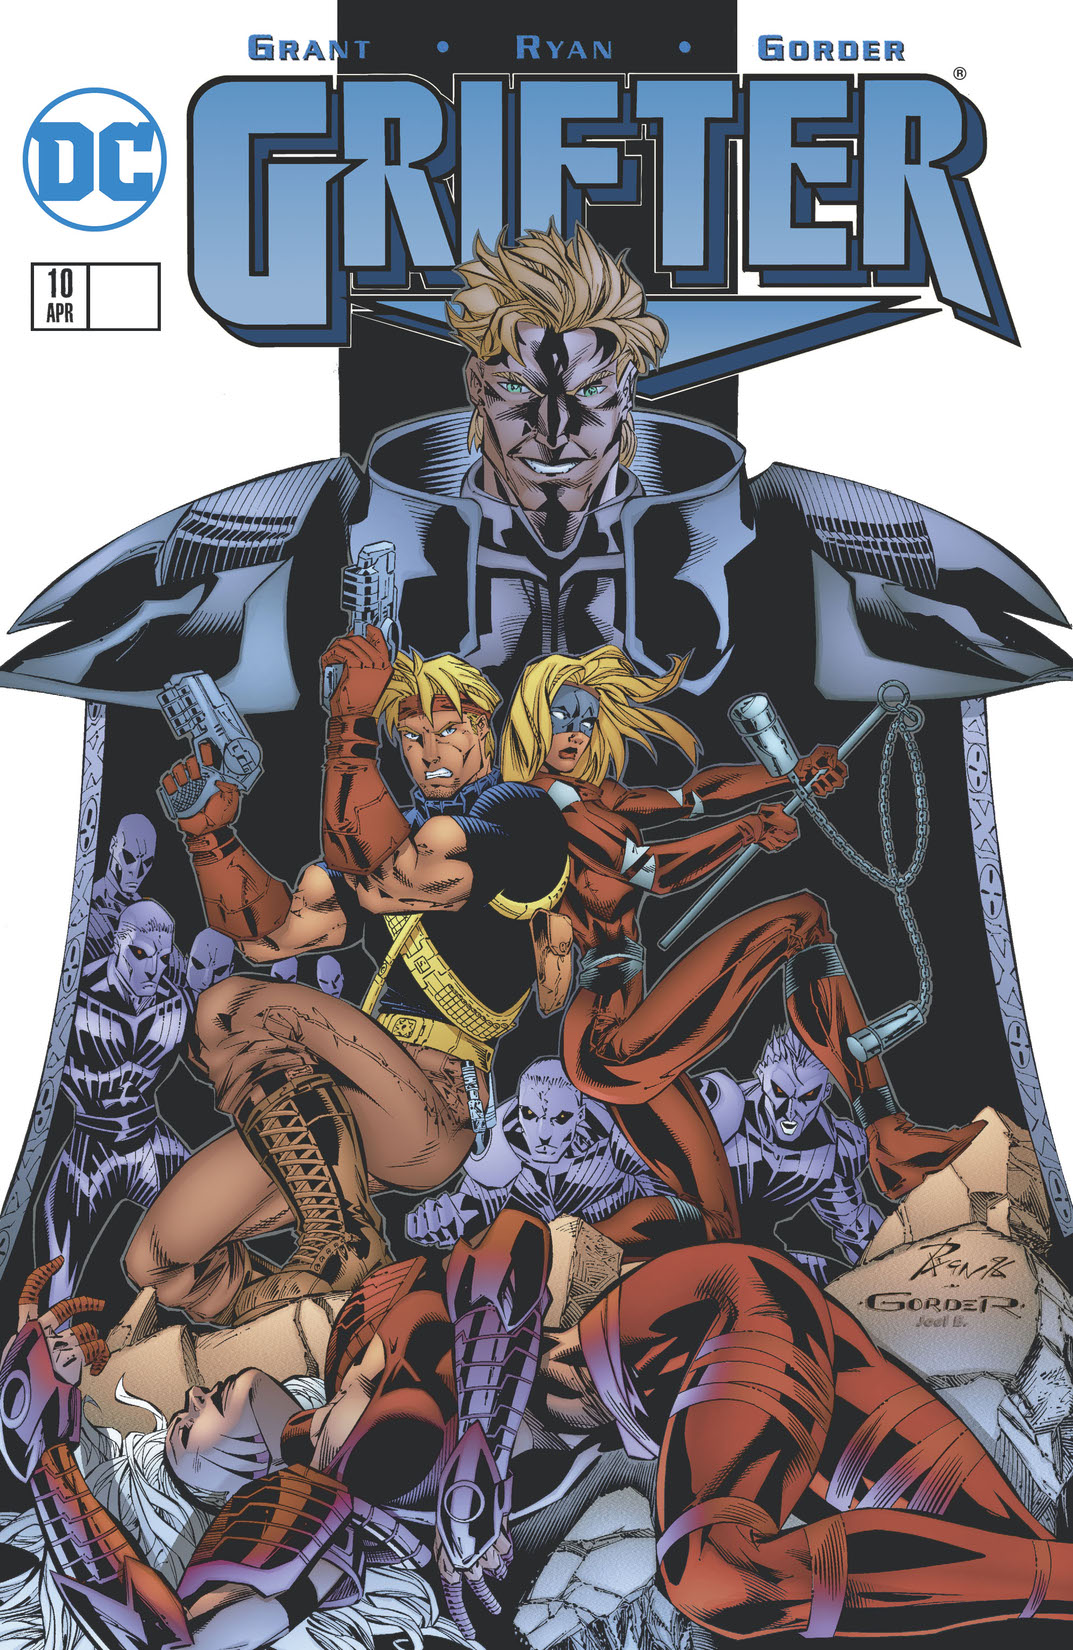 Grifter (1996-1997) #10 preview images